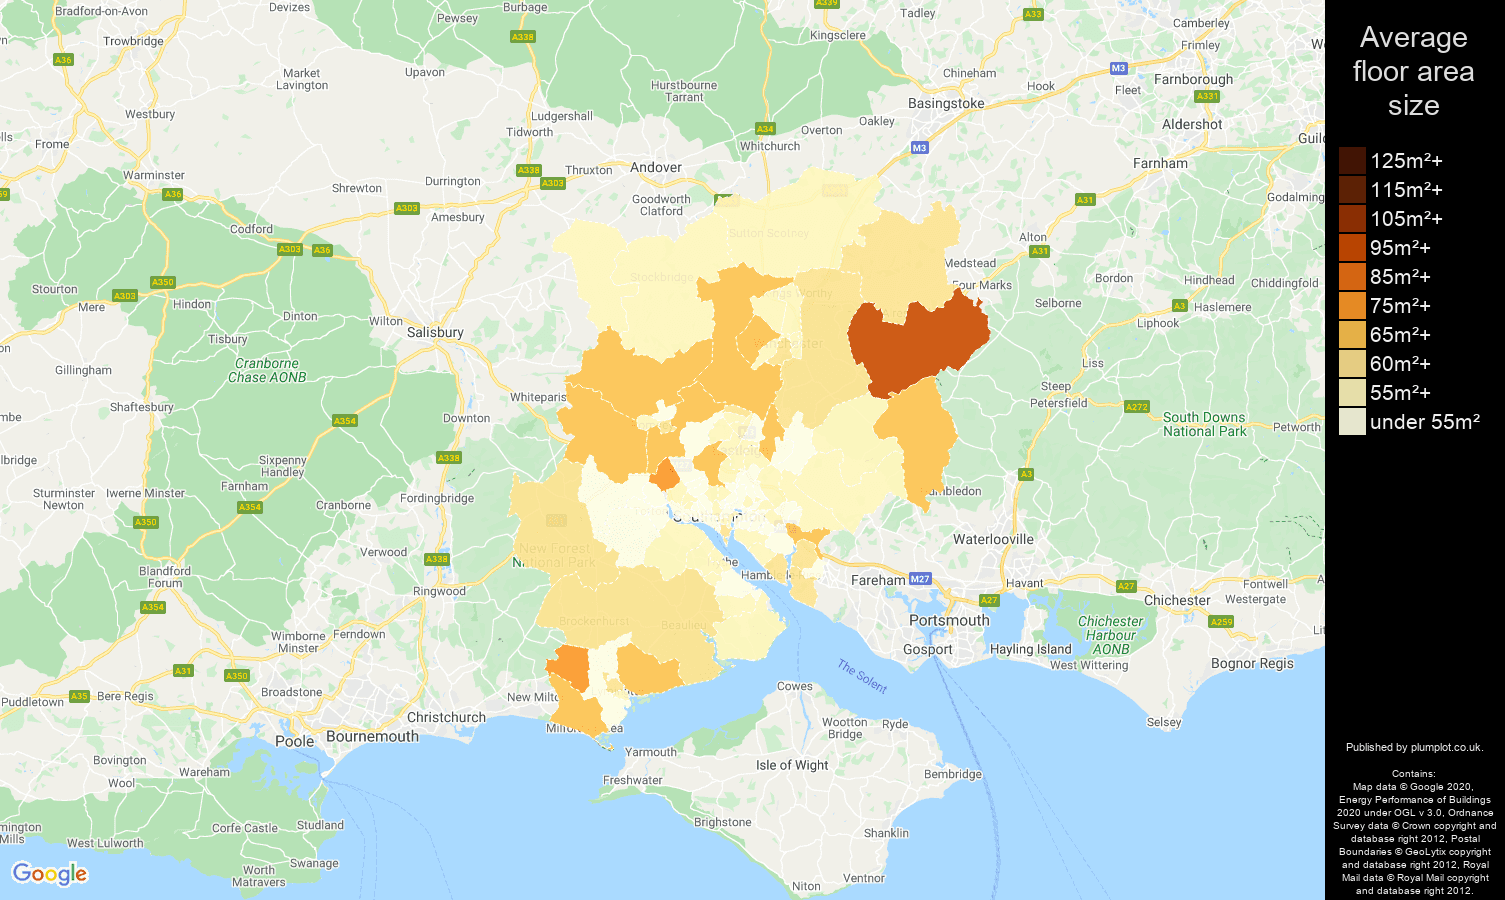 Southampton map of average floor area size of flats